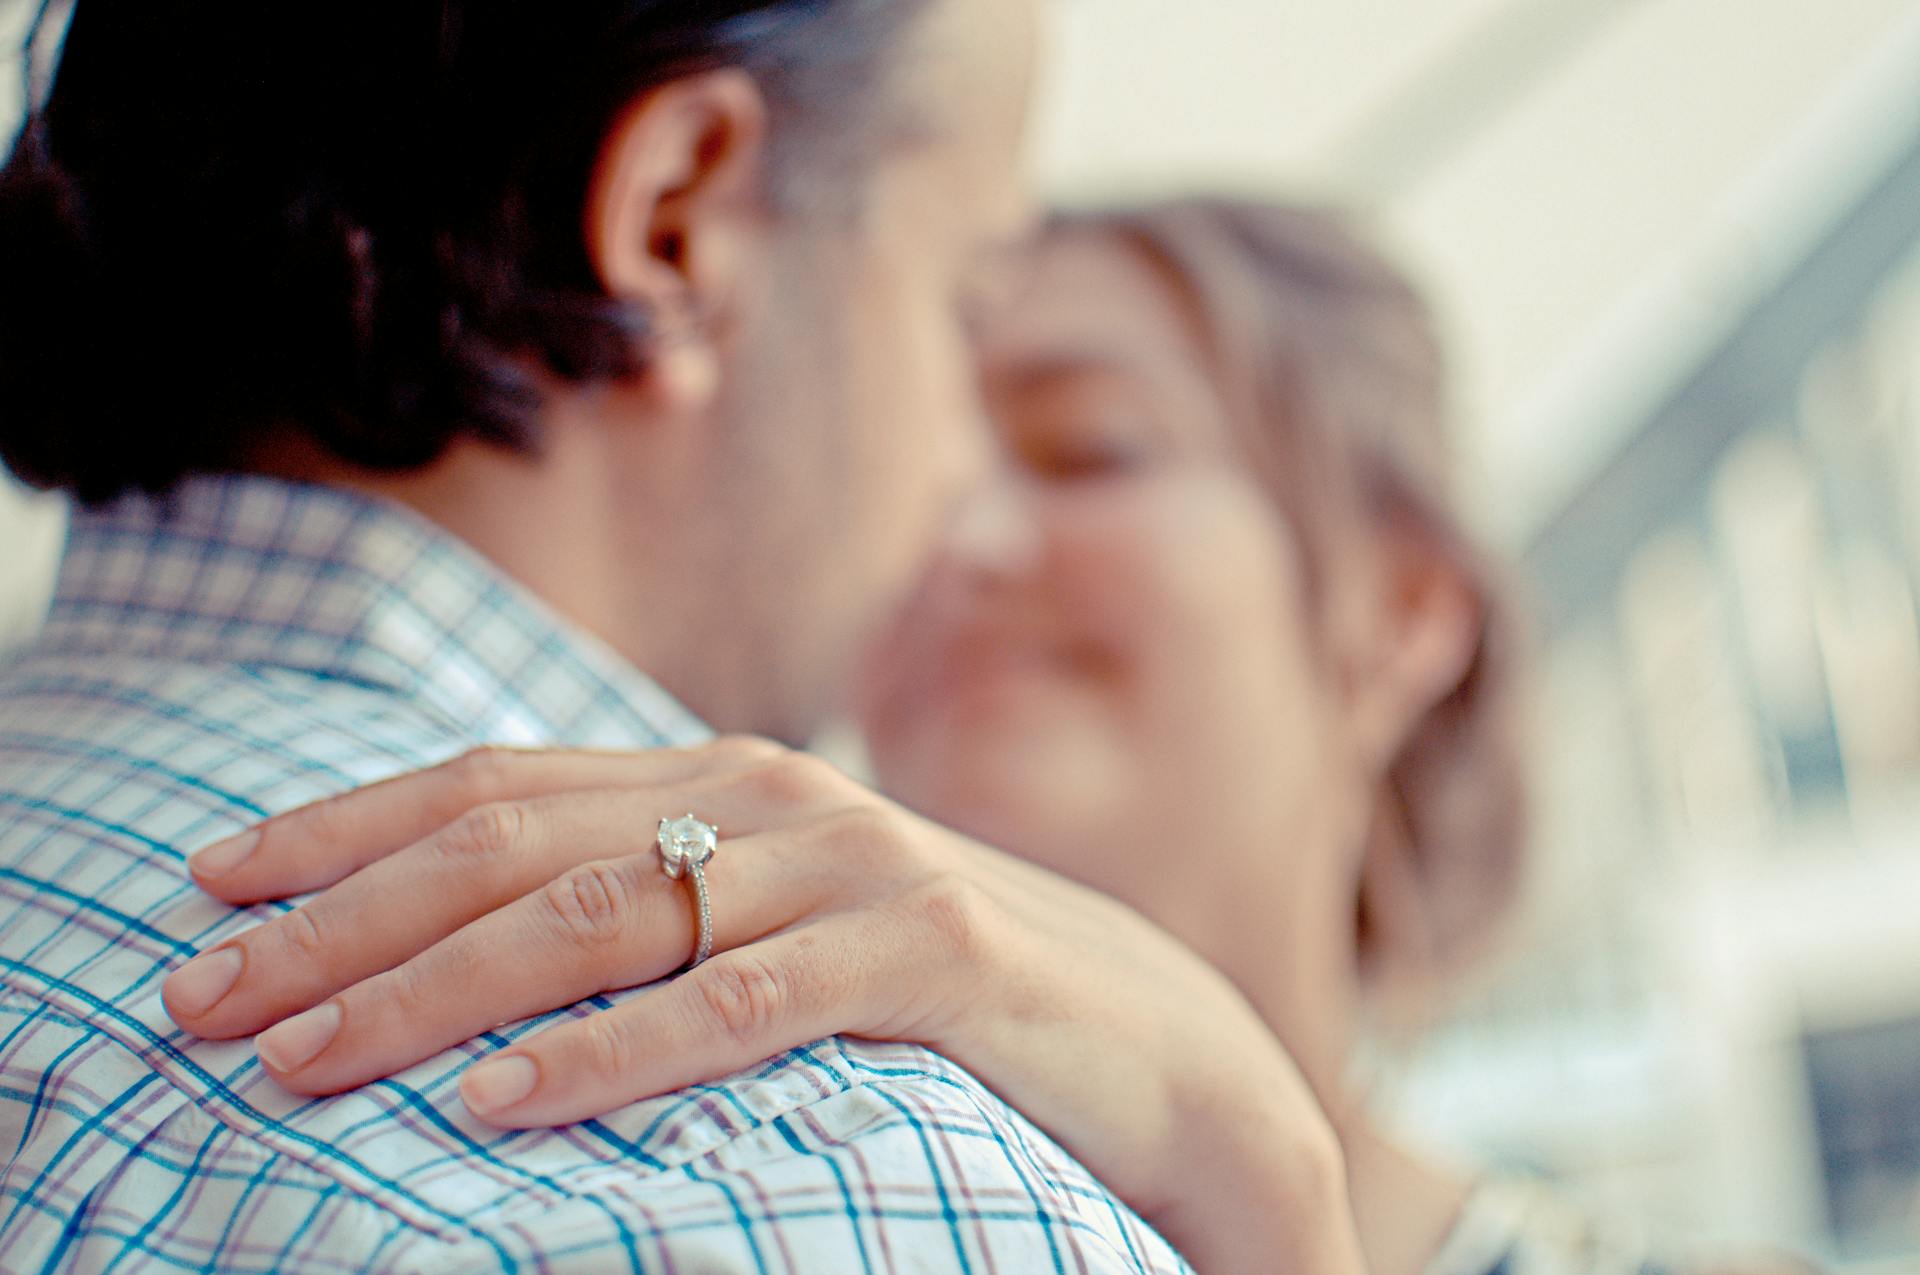 A shallow focus photo of a man and woman hugging | Source: Pexels